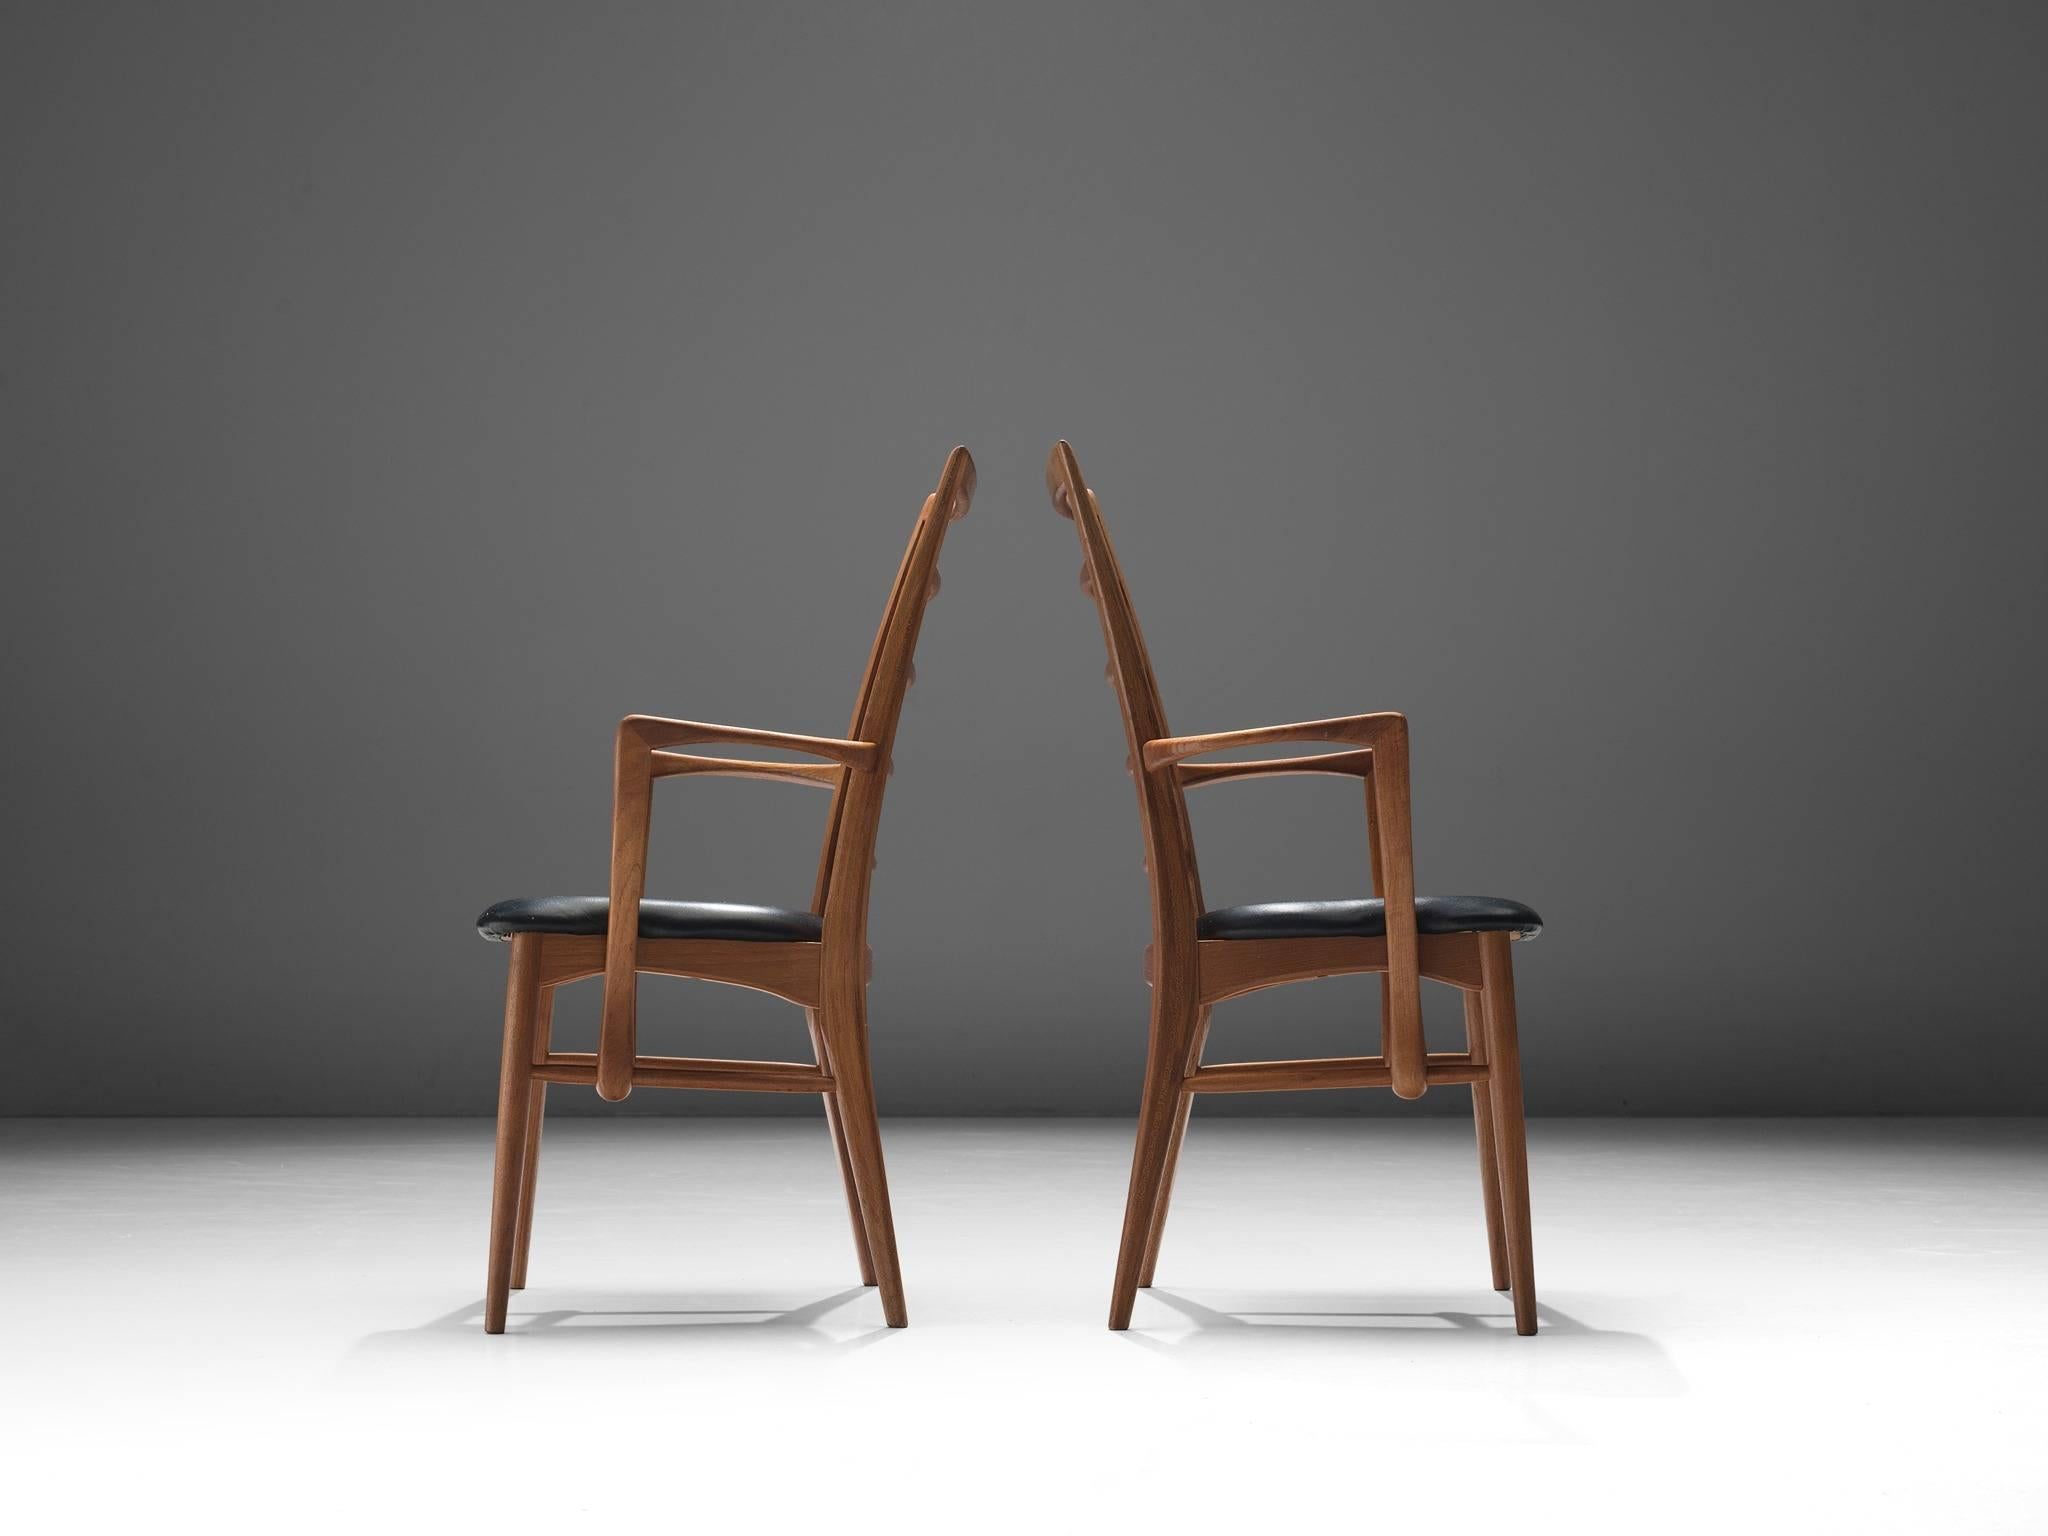 Niels Koefoed for Koefoeds Møbelfabrik, dining chairs 'Liz', teak, black leather, Denmark, circa 1968.

This set of side chairs is designed by Niels Koefoed for Koefoeds Møbelfabrik. These chairs main feature is their high back with horizontal